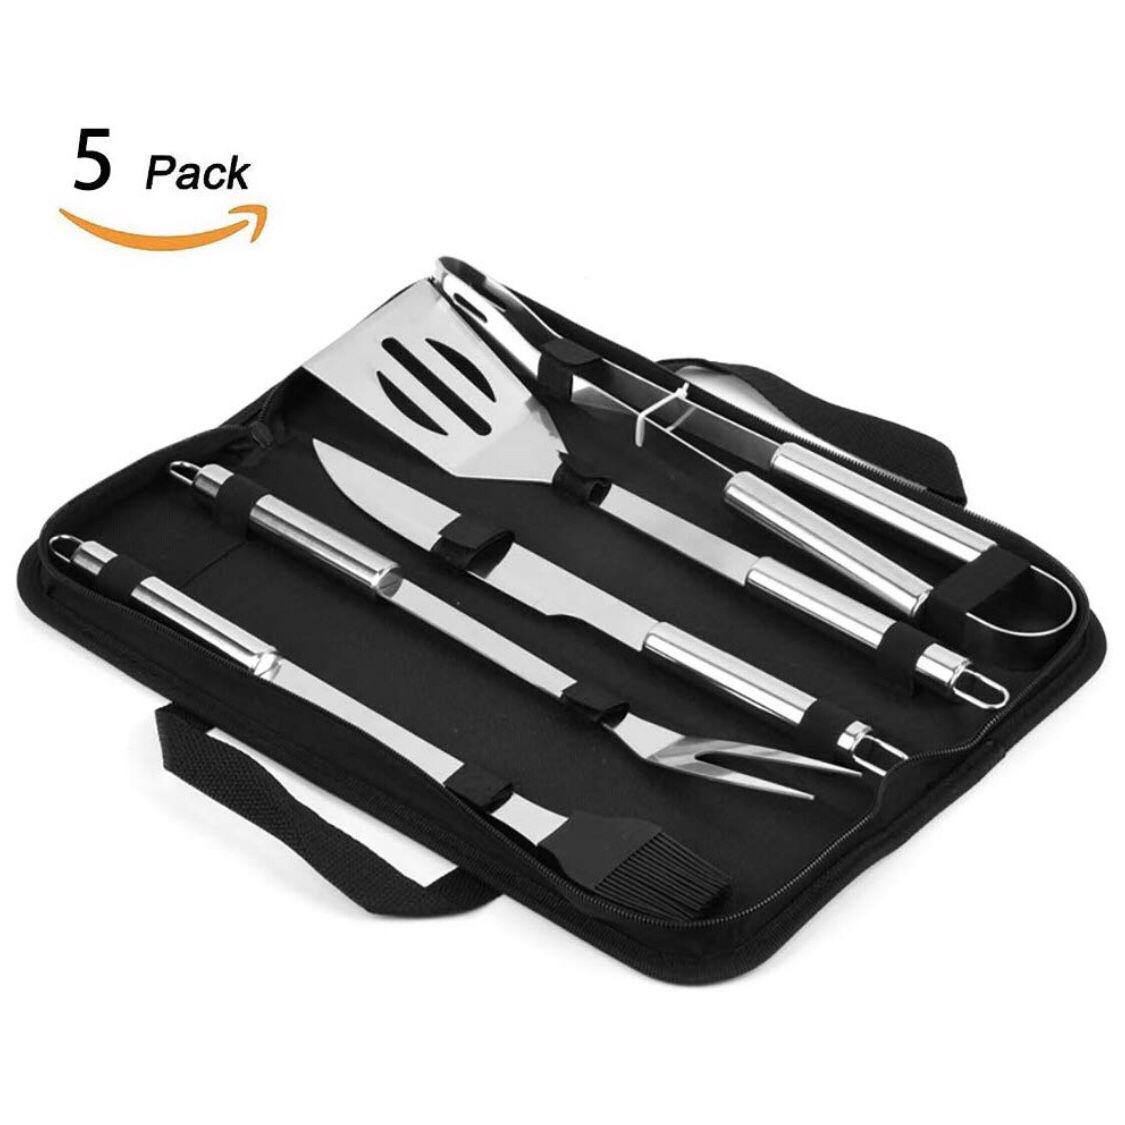 172. Sixbagin BBQ Grill Tool Set,5 Pieces Stainless Steel Barbecue Grilling Accessories,Outdoor Camping Grill Kit for Men Dad as Gift- Spatula, Tongs